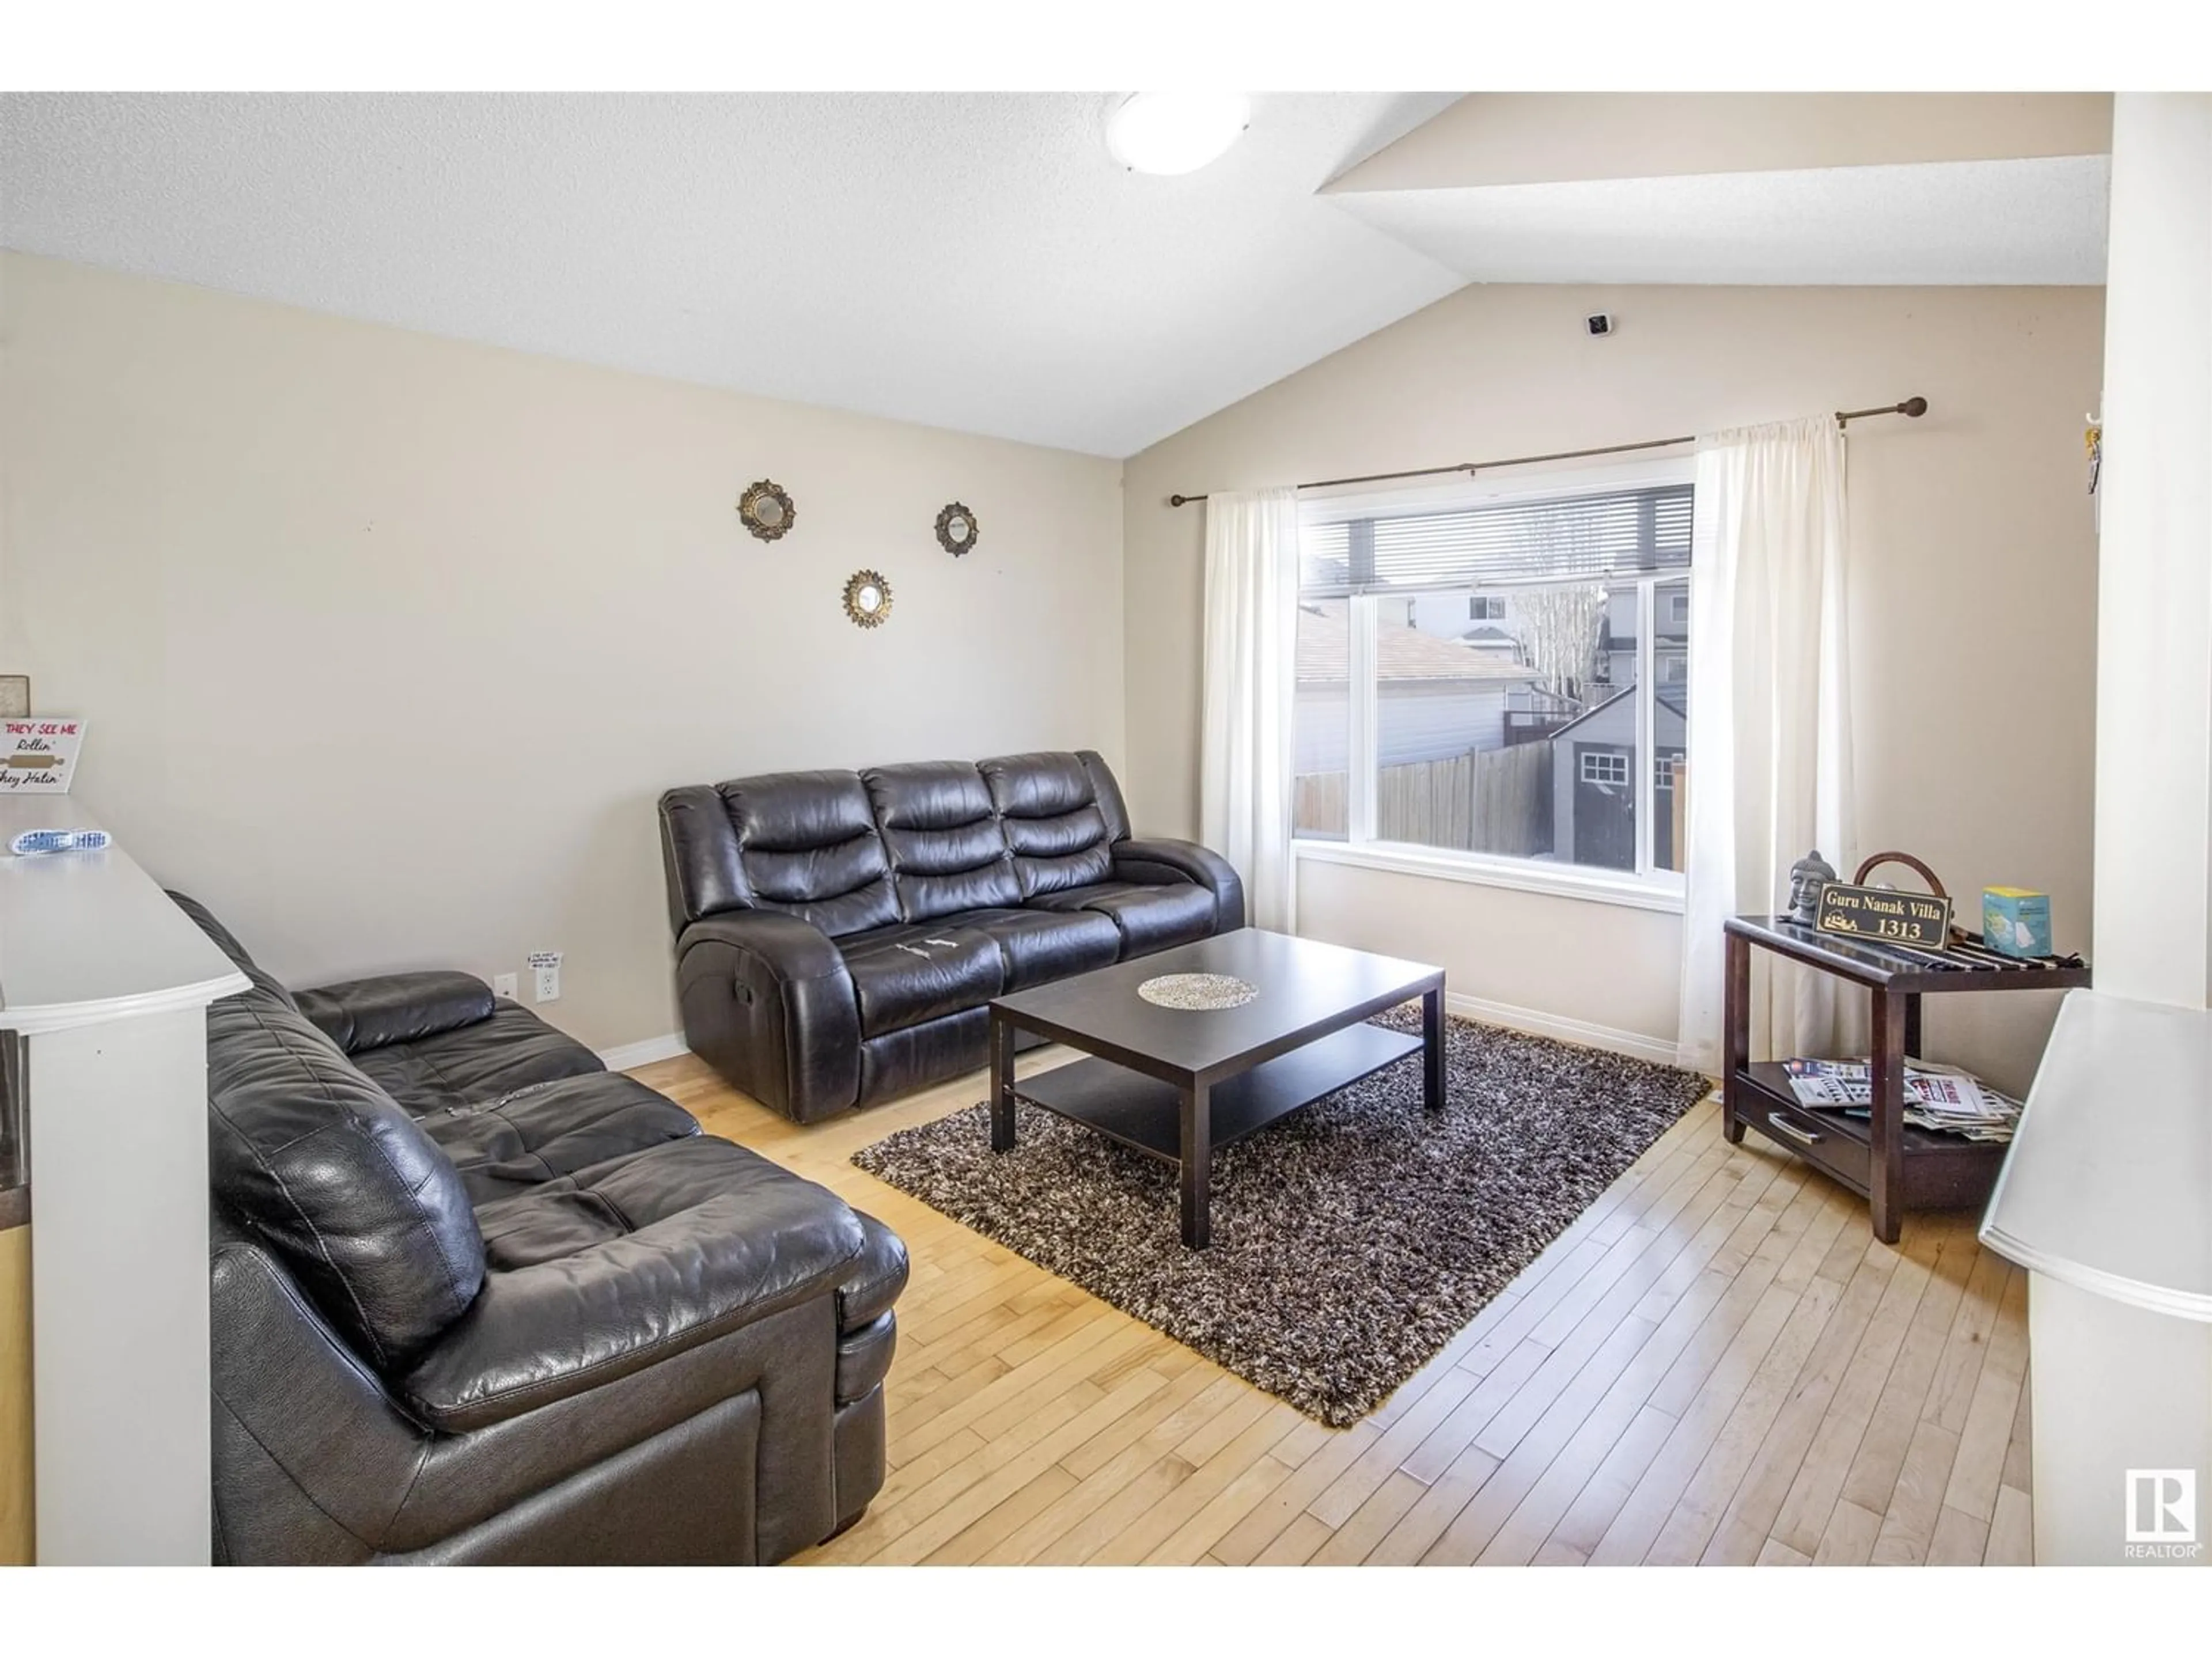 Living room for 14844 139 ST NW NW NW, Edmonton Alberta T6B1S2